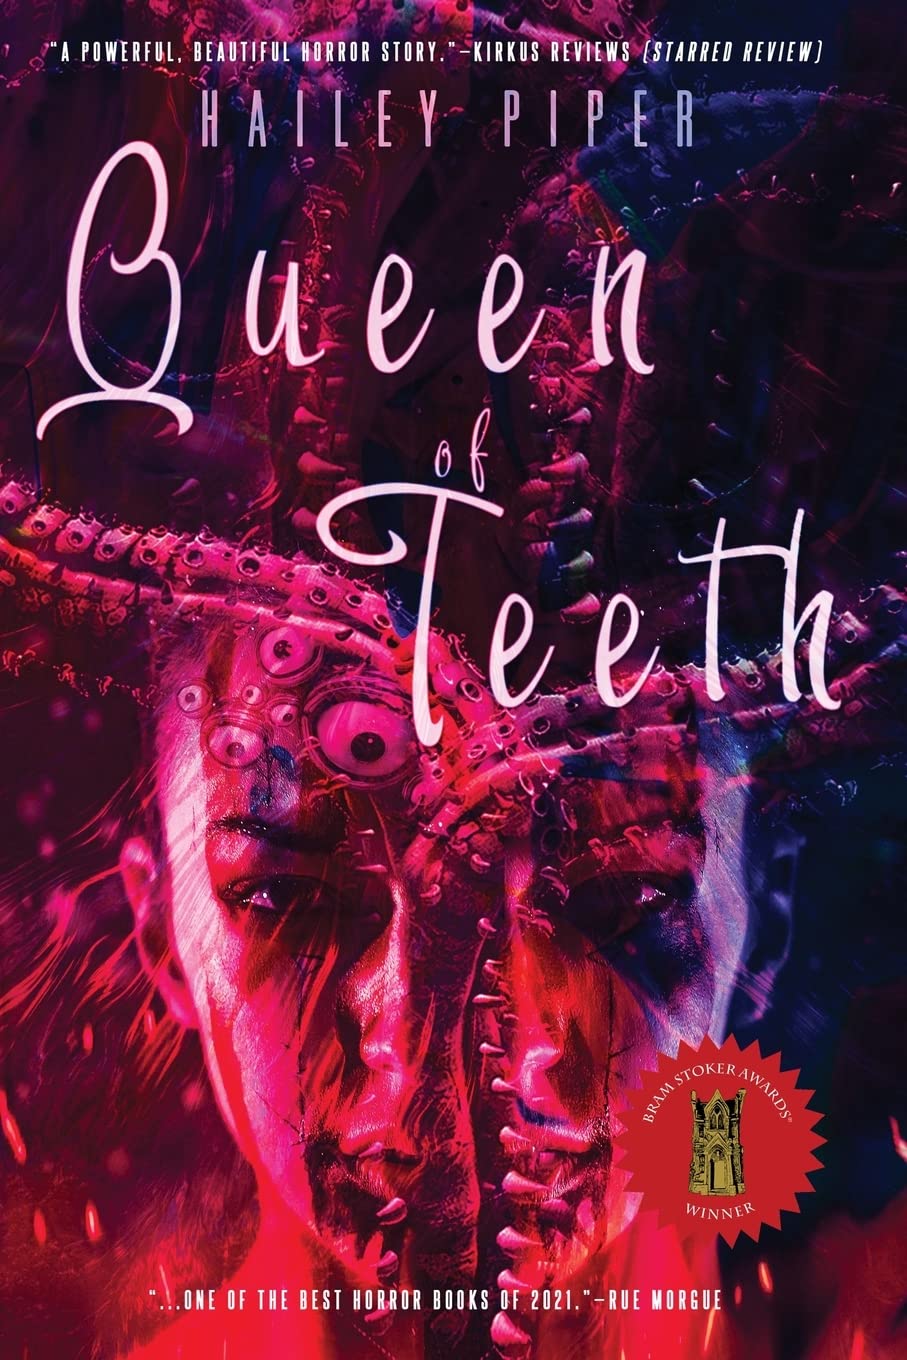 Queen of Teeth by Hailey Piper